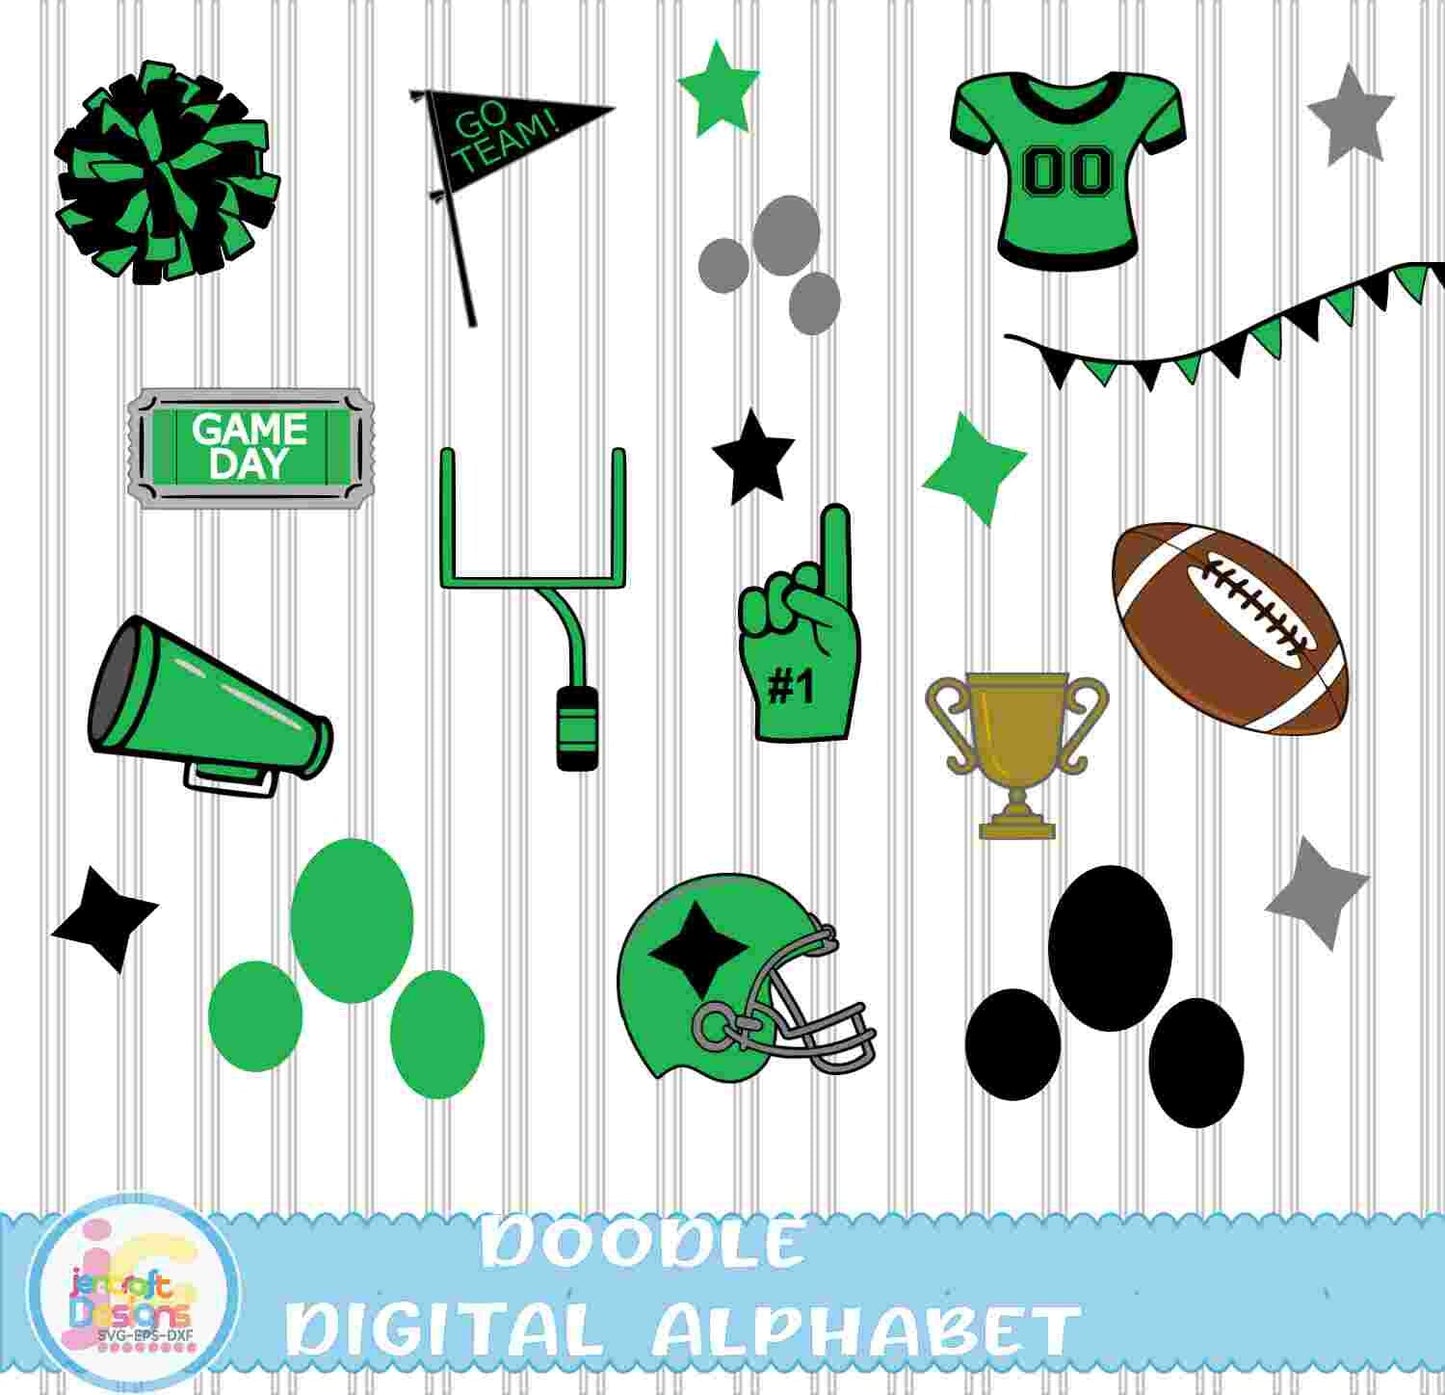 Black and Green Football Doodle Letters Alphabet Png Print File for Sublimation or Printing - JenCraft Designs